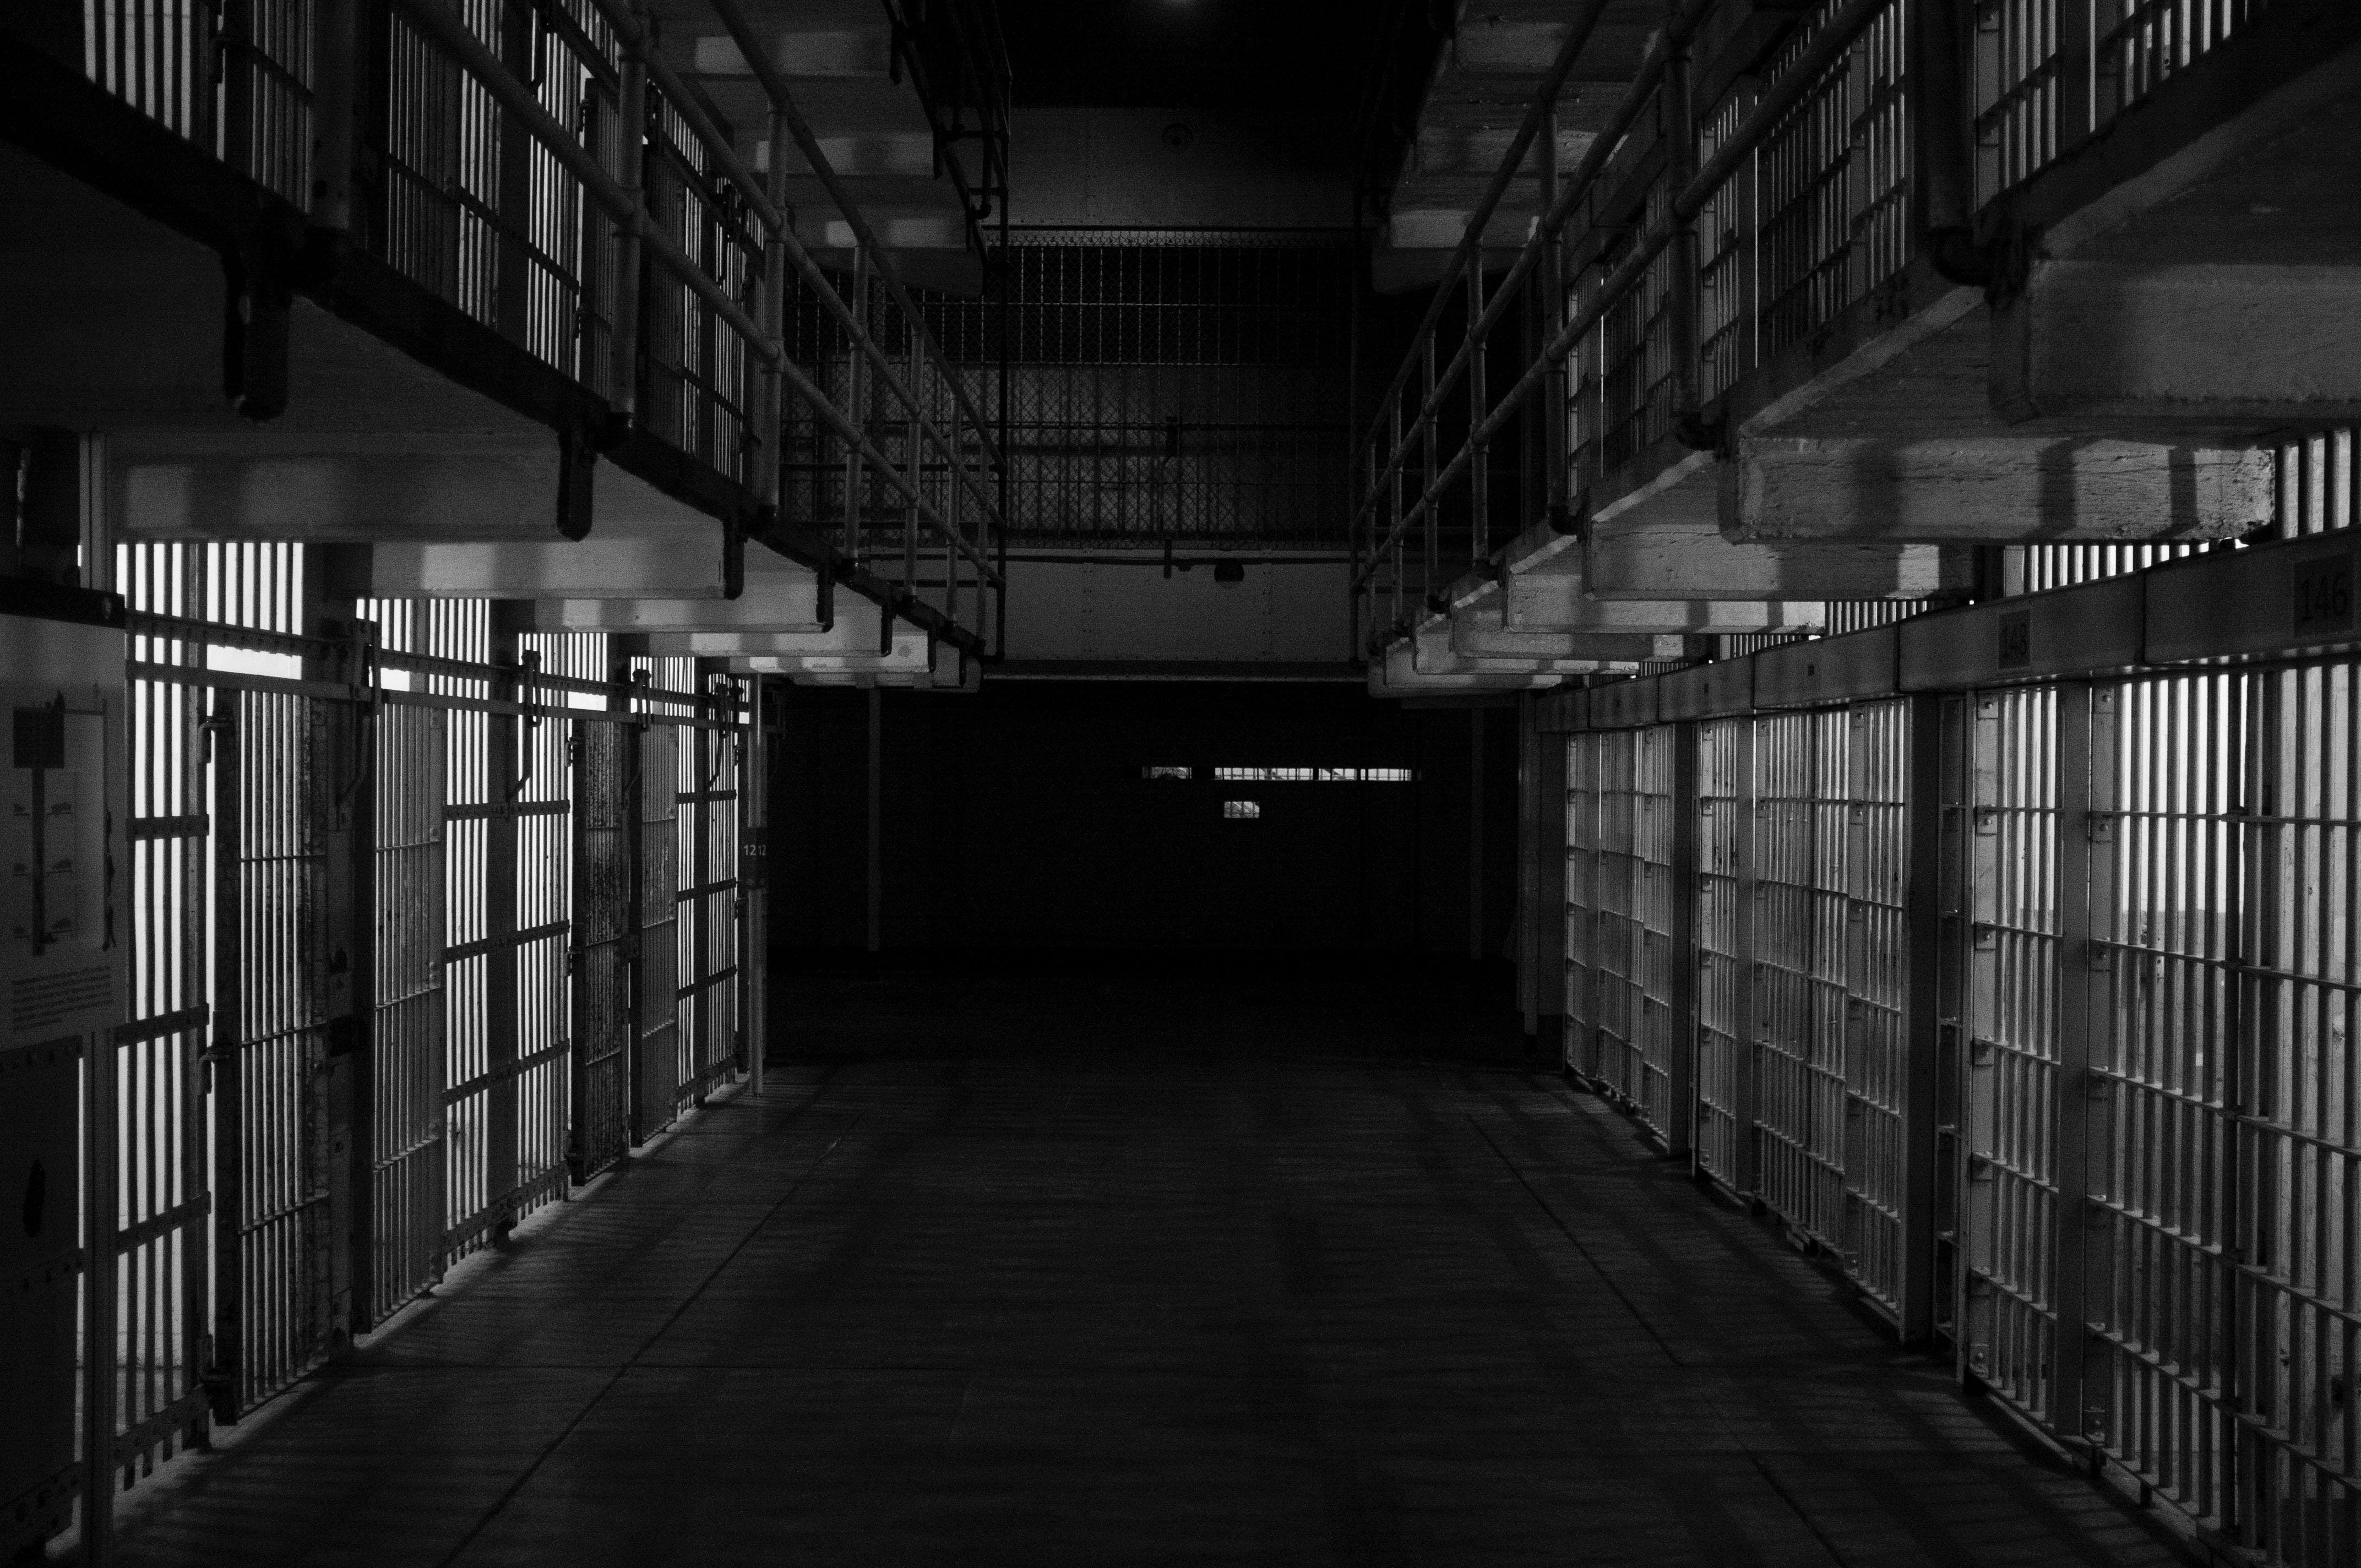 Photo of prisoner cells by Emiliano Bar